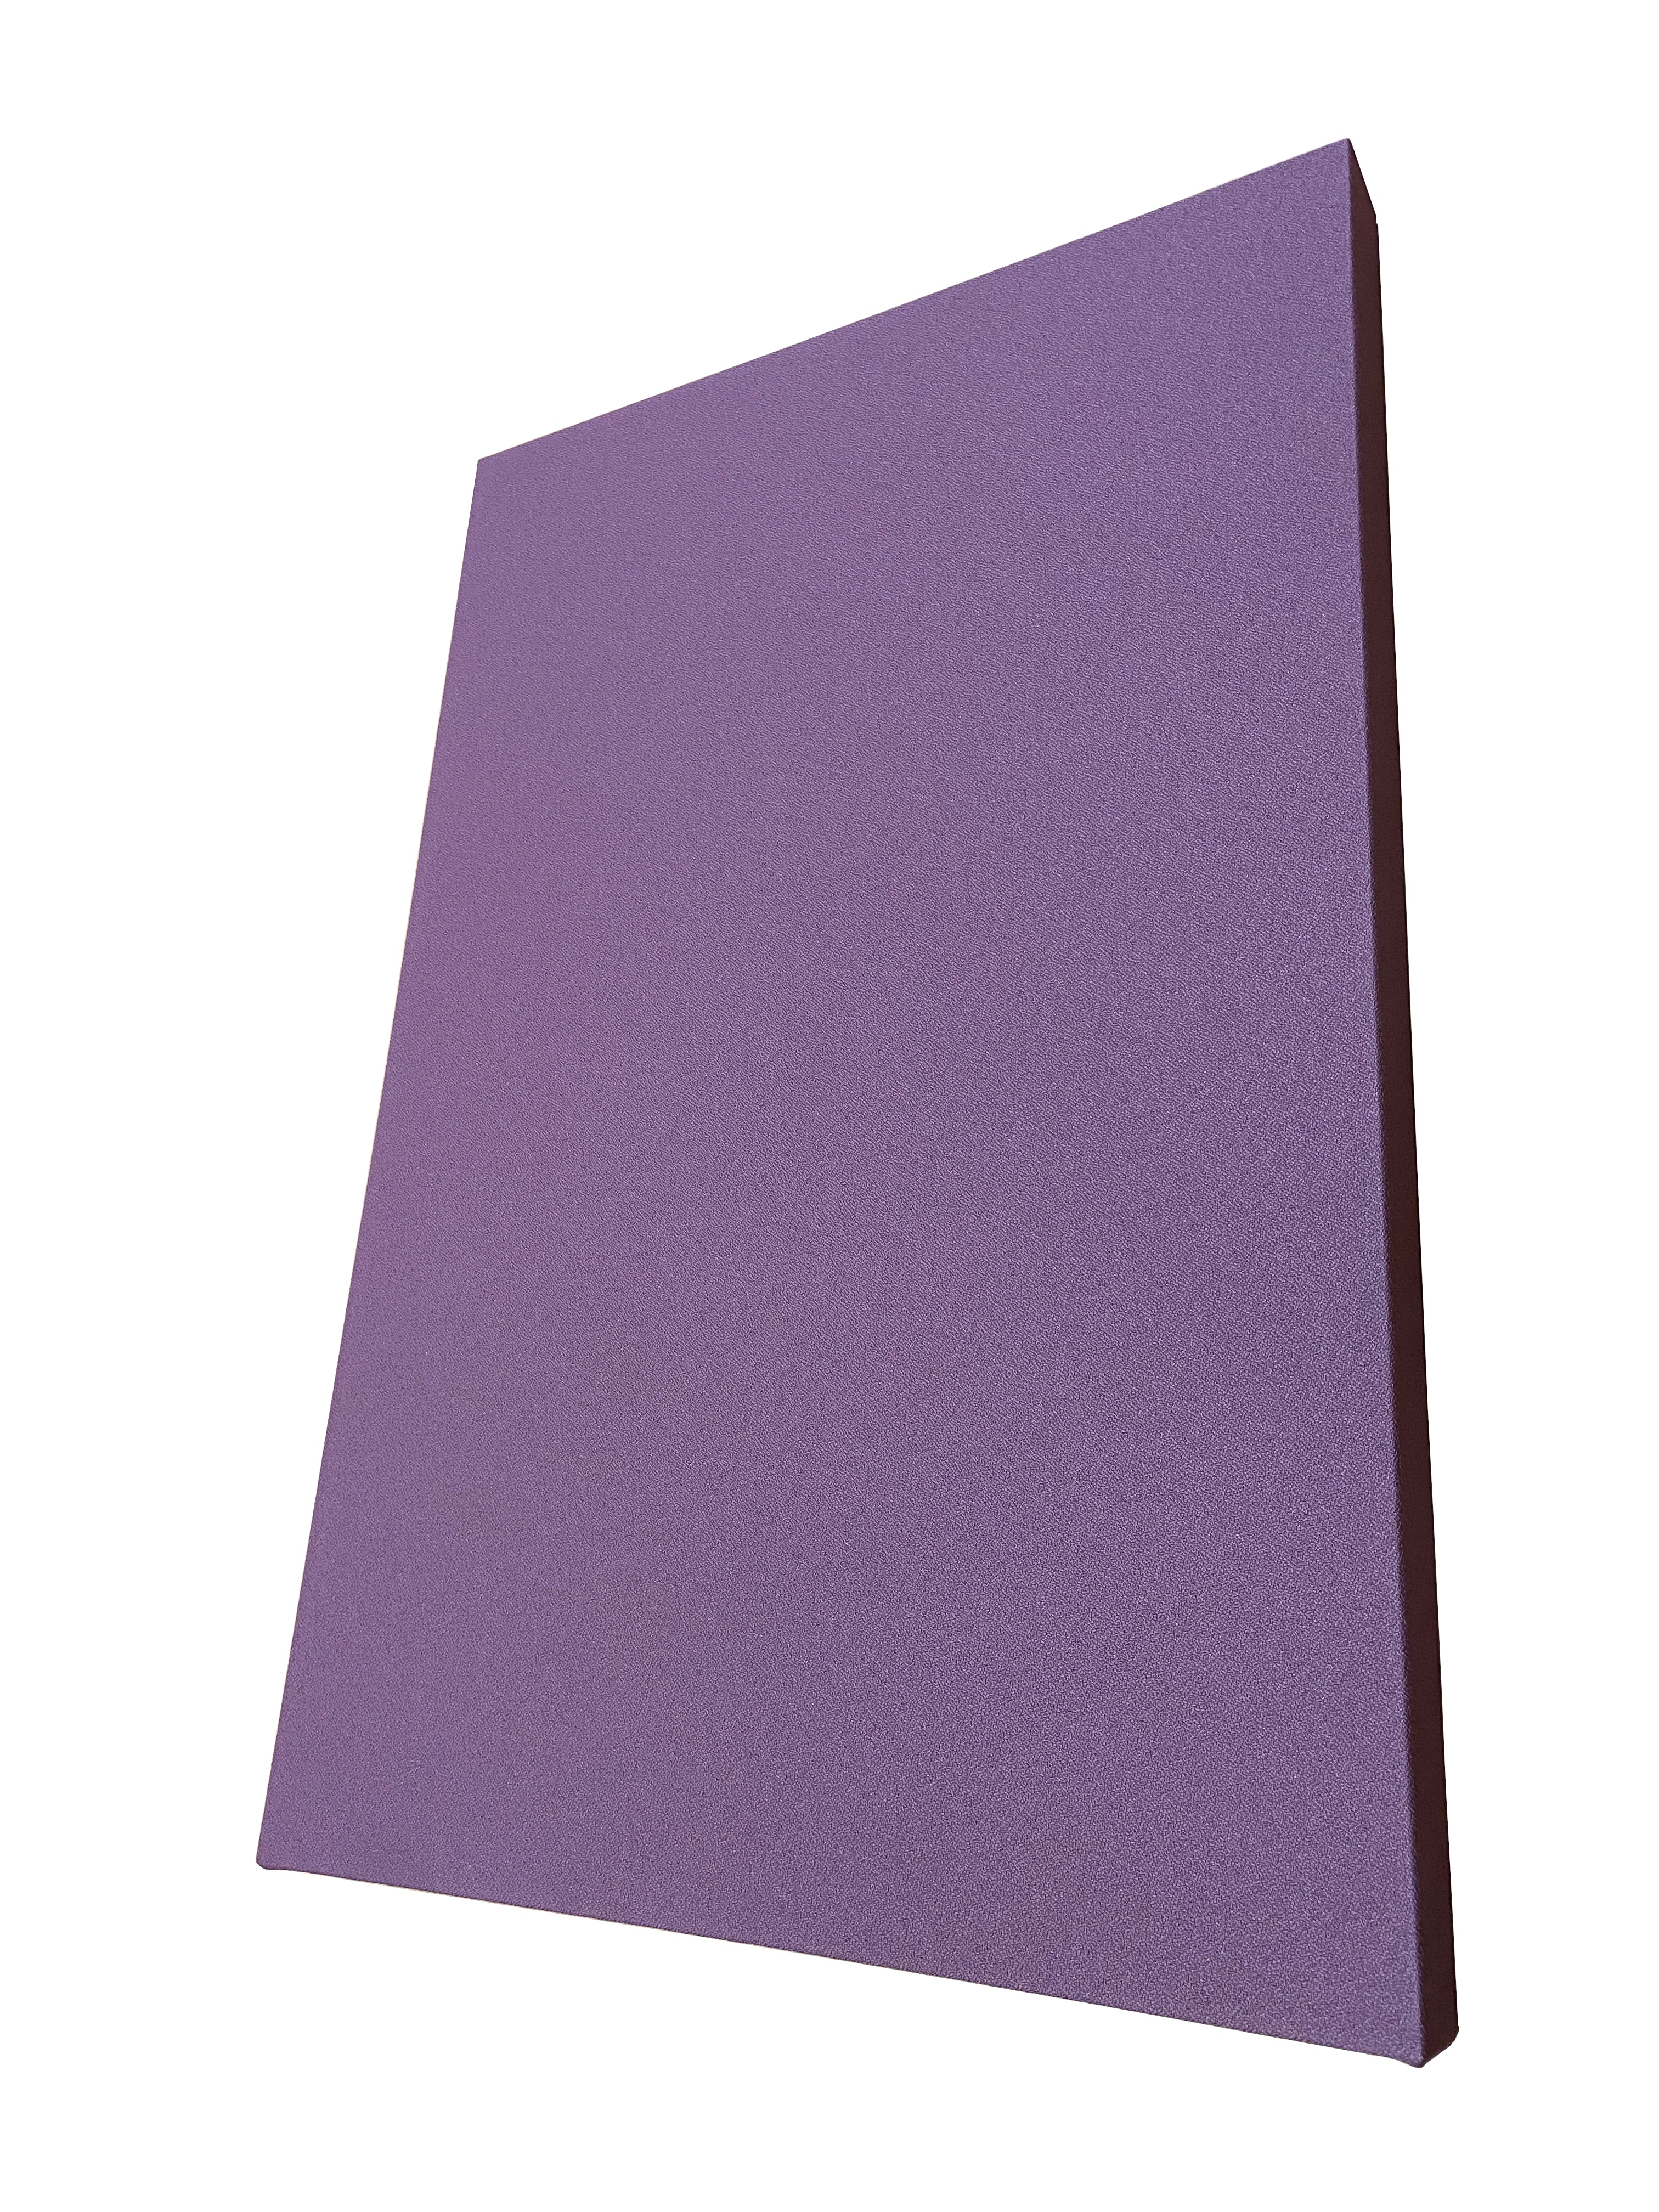 2" SoundControl Ceiling Mounted Acoustic Panel 2ft by 3ft-2